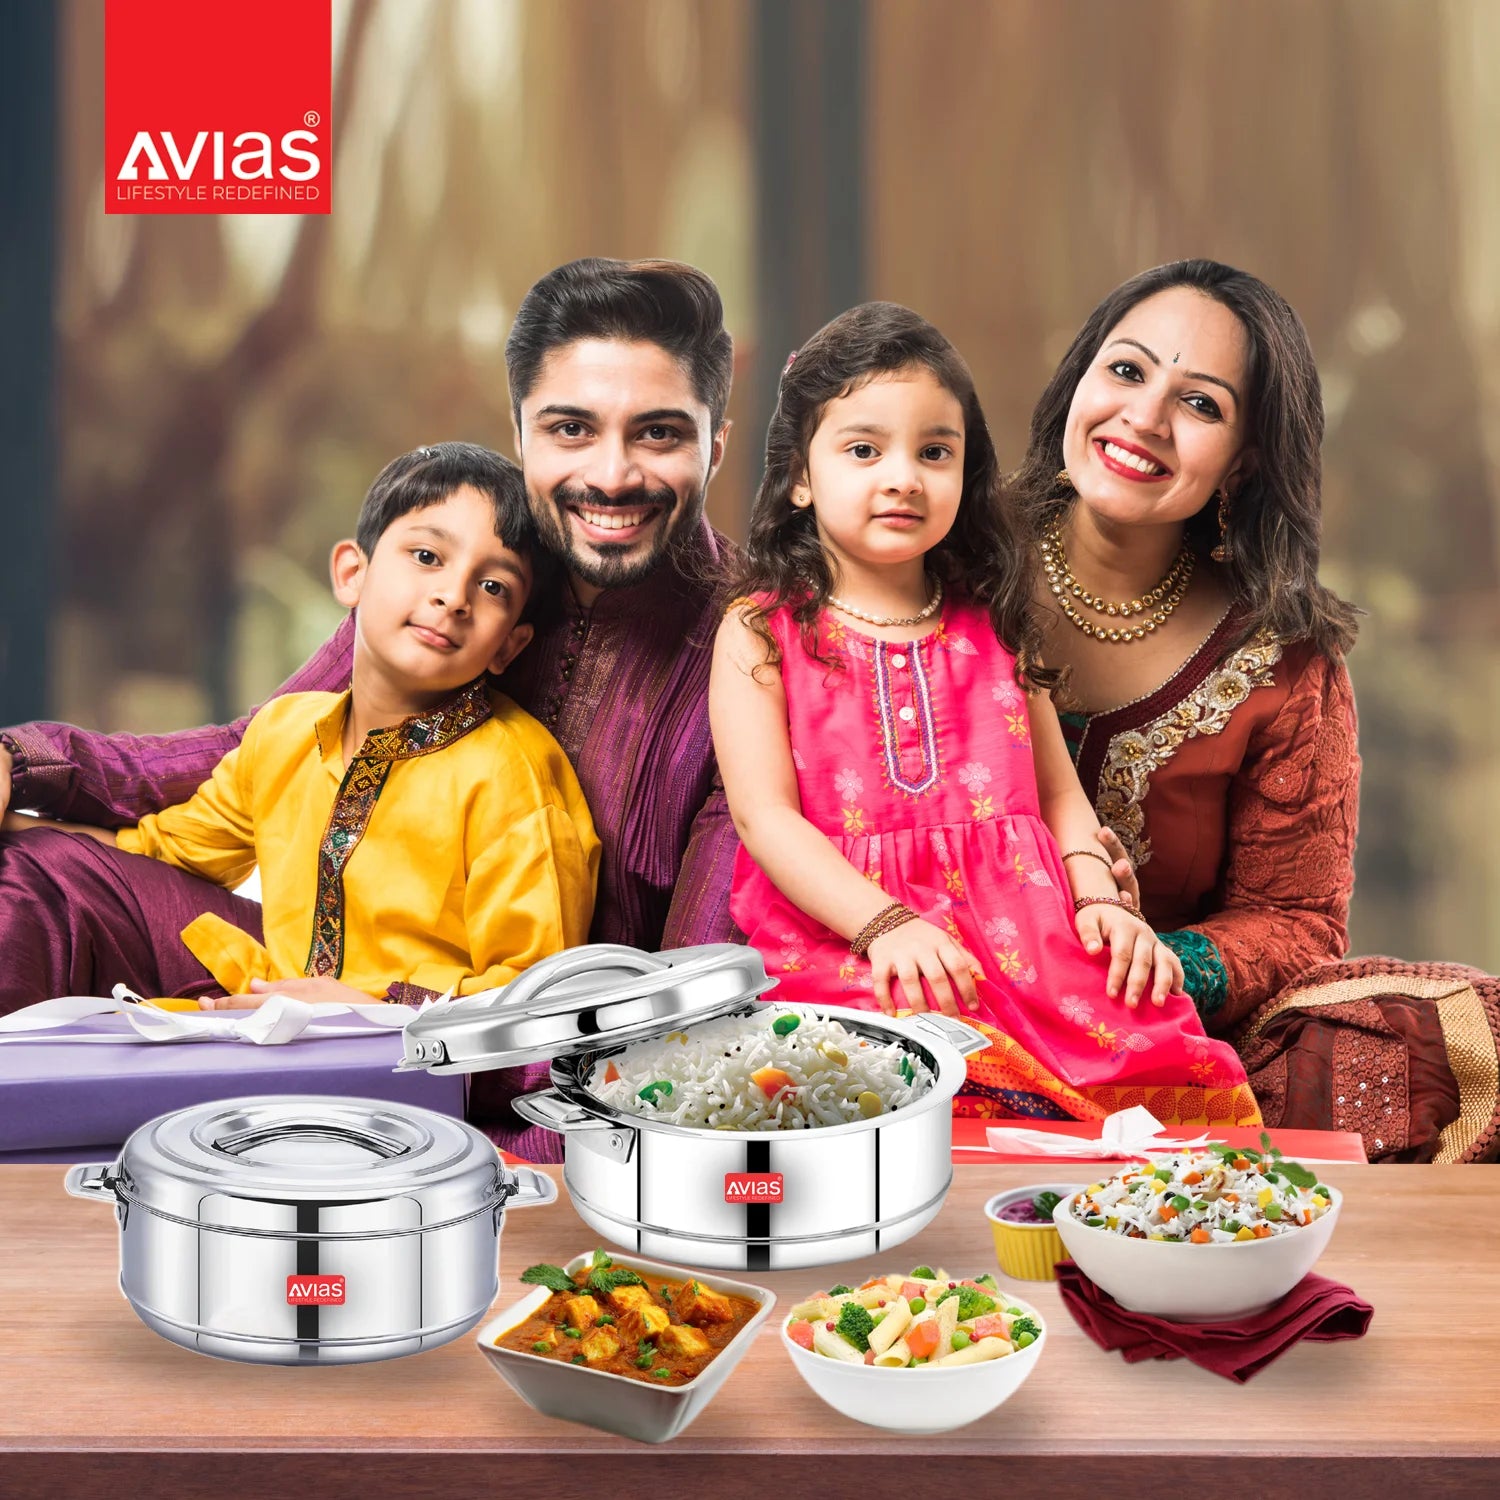 AVIAS Astra Stainless Steel Casserole set of 3 for all food serving